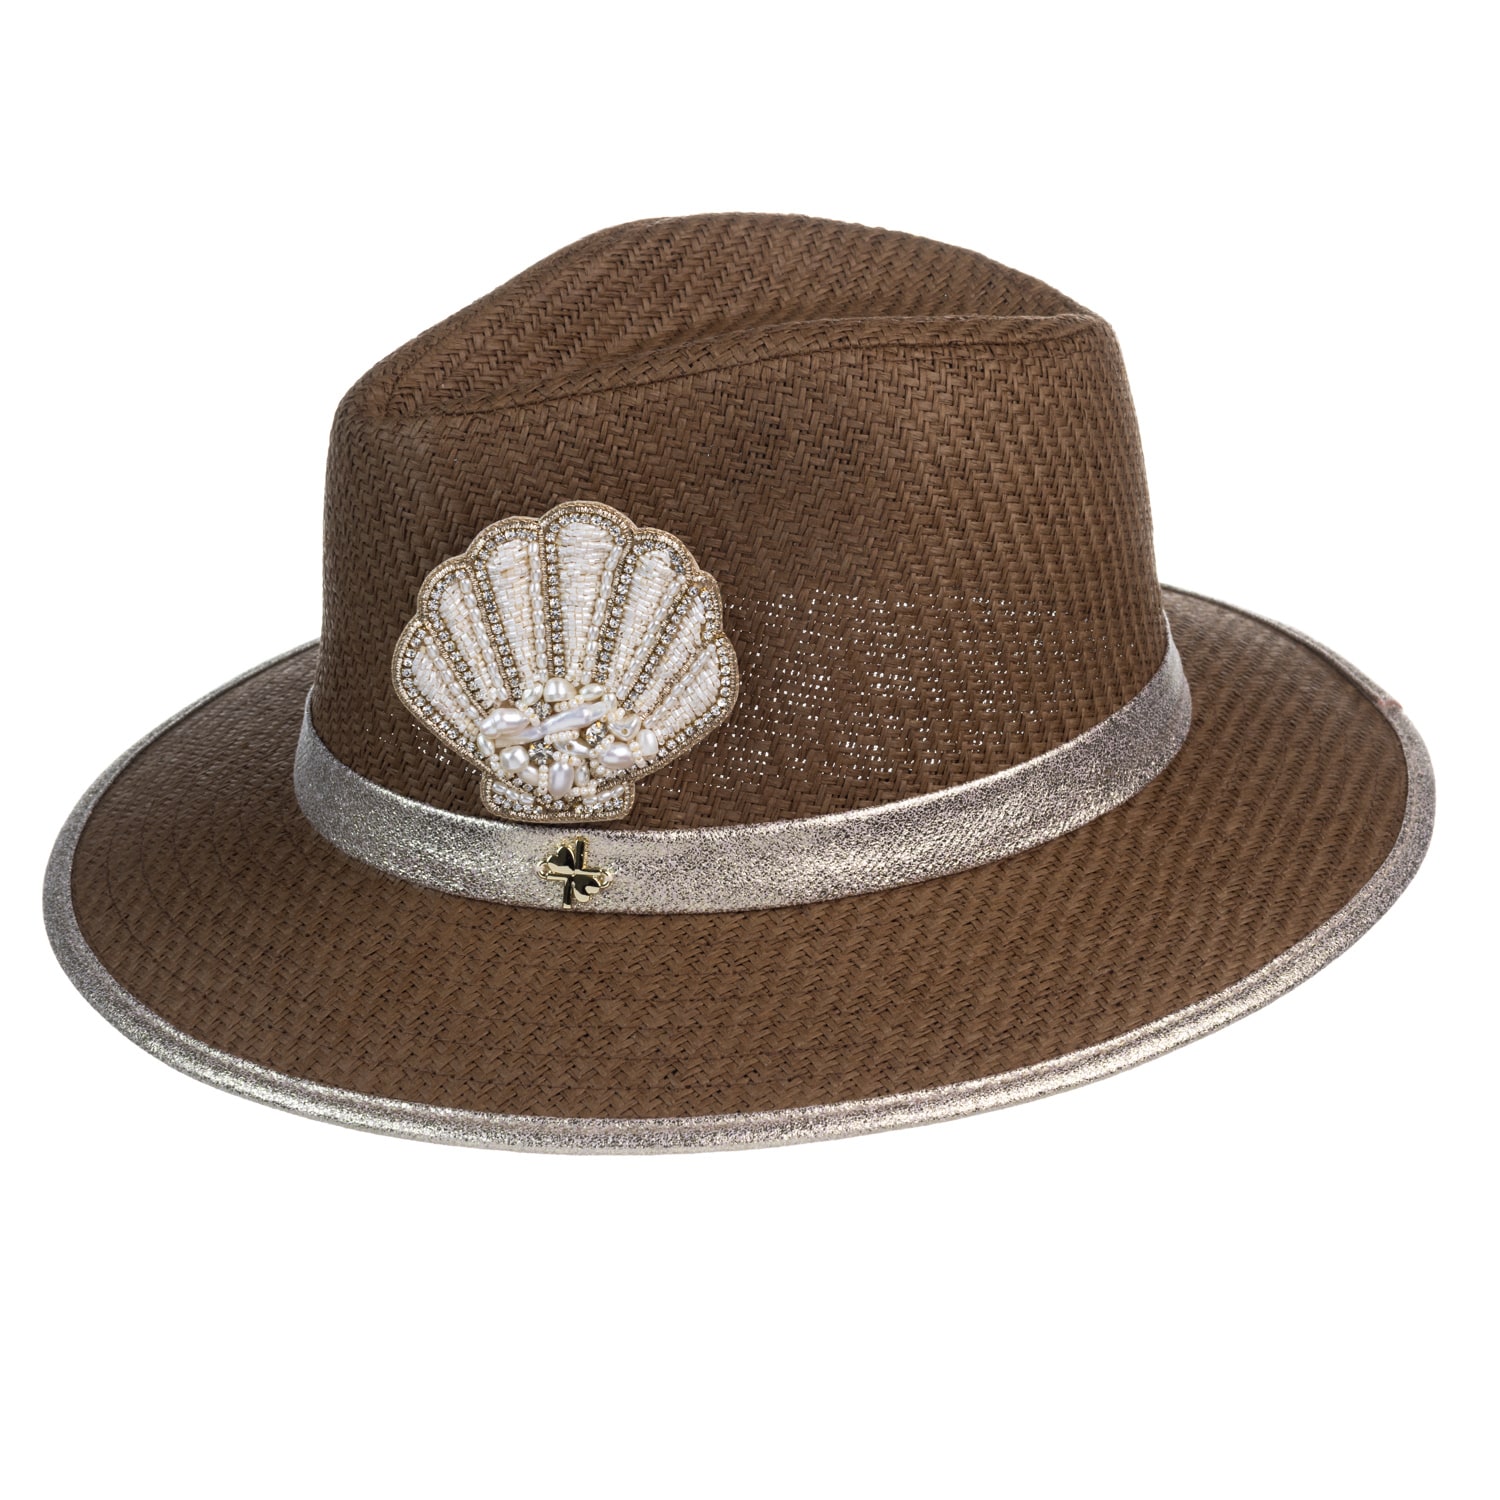 Women’s Brown Straw Woven Hat With Pearl Beaded Shell - Caramel One Size Laines London